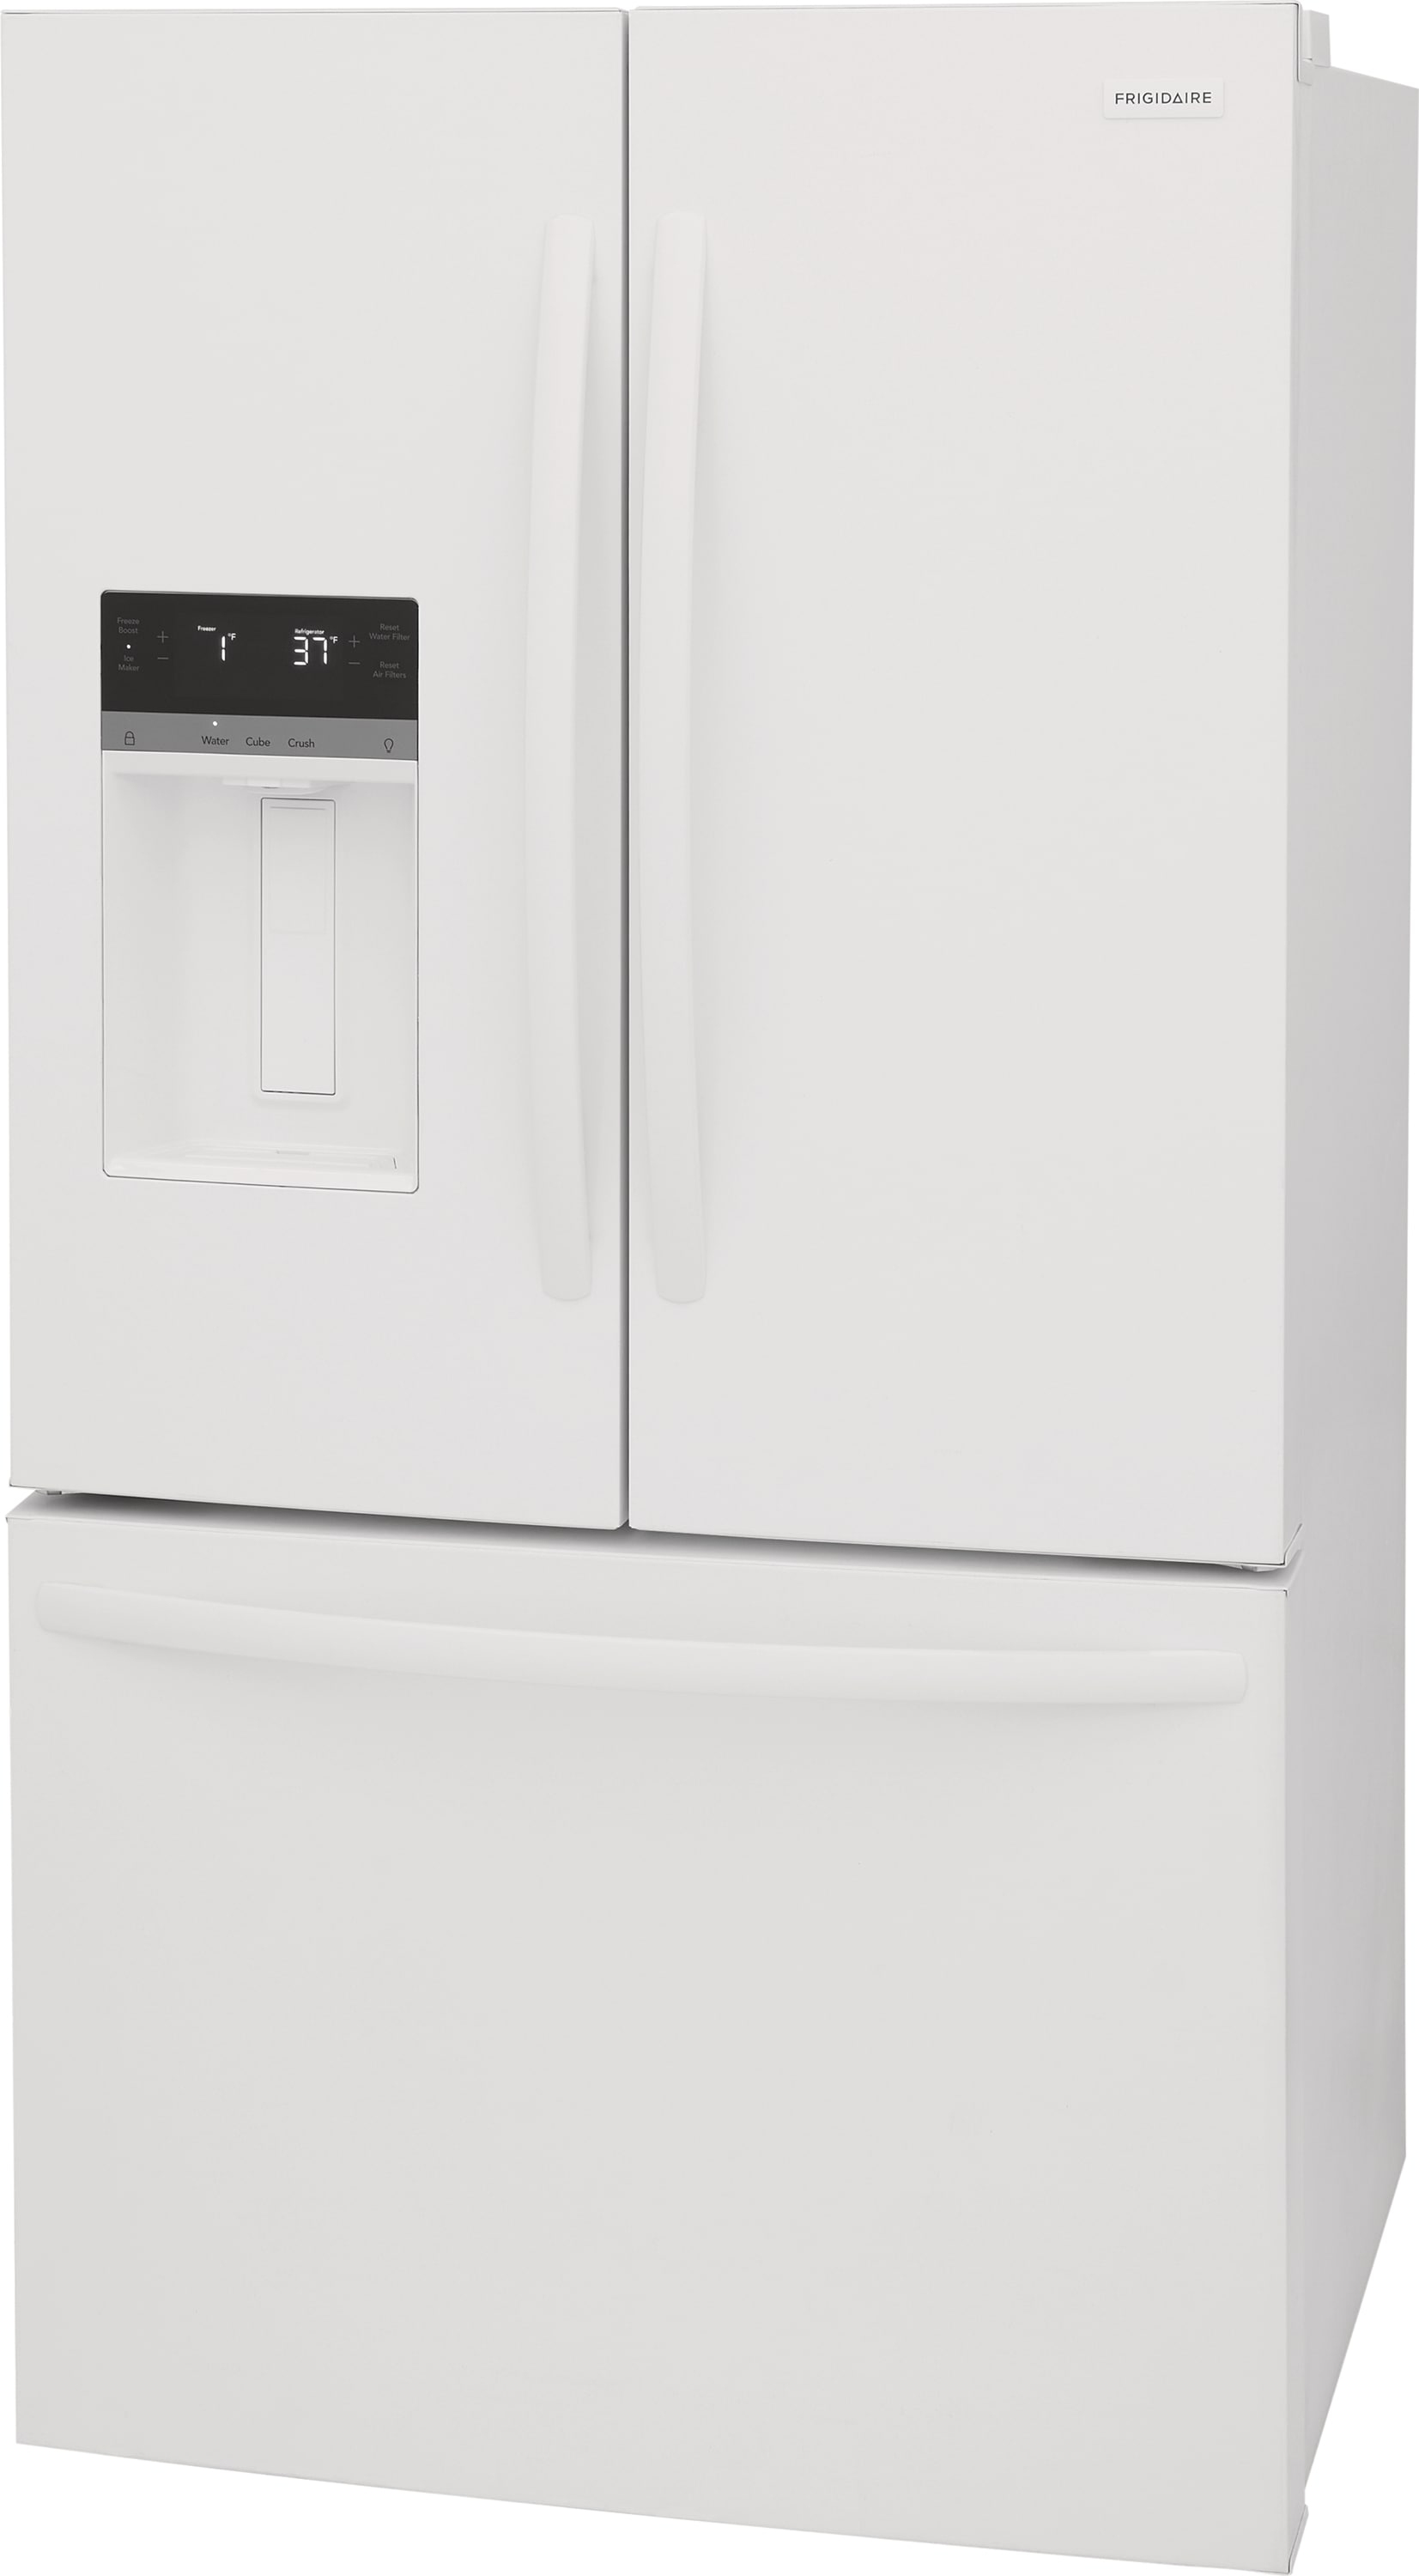 Has anyone tried the new Frigidaire Ice Maker? Does Automated